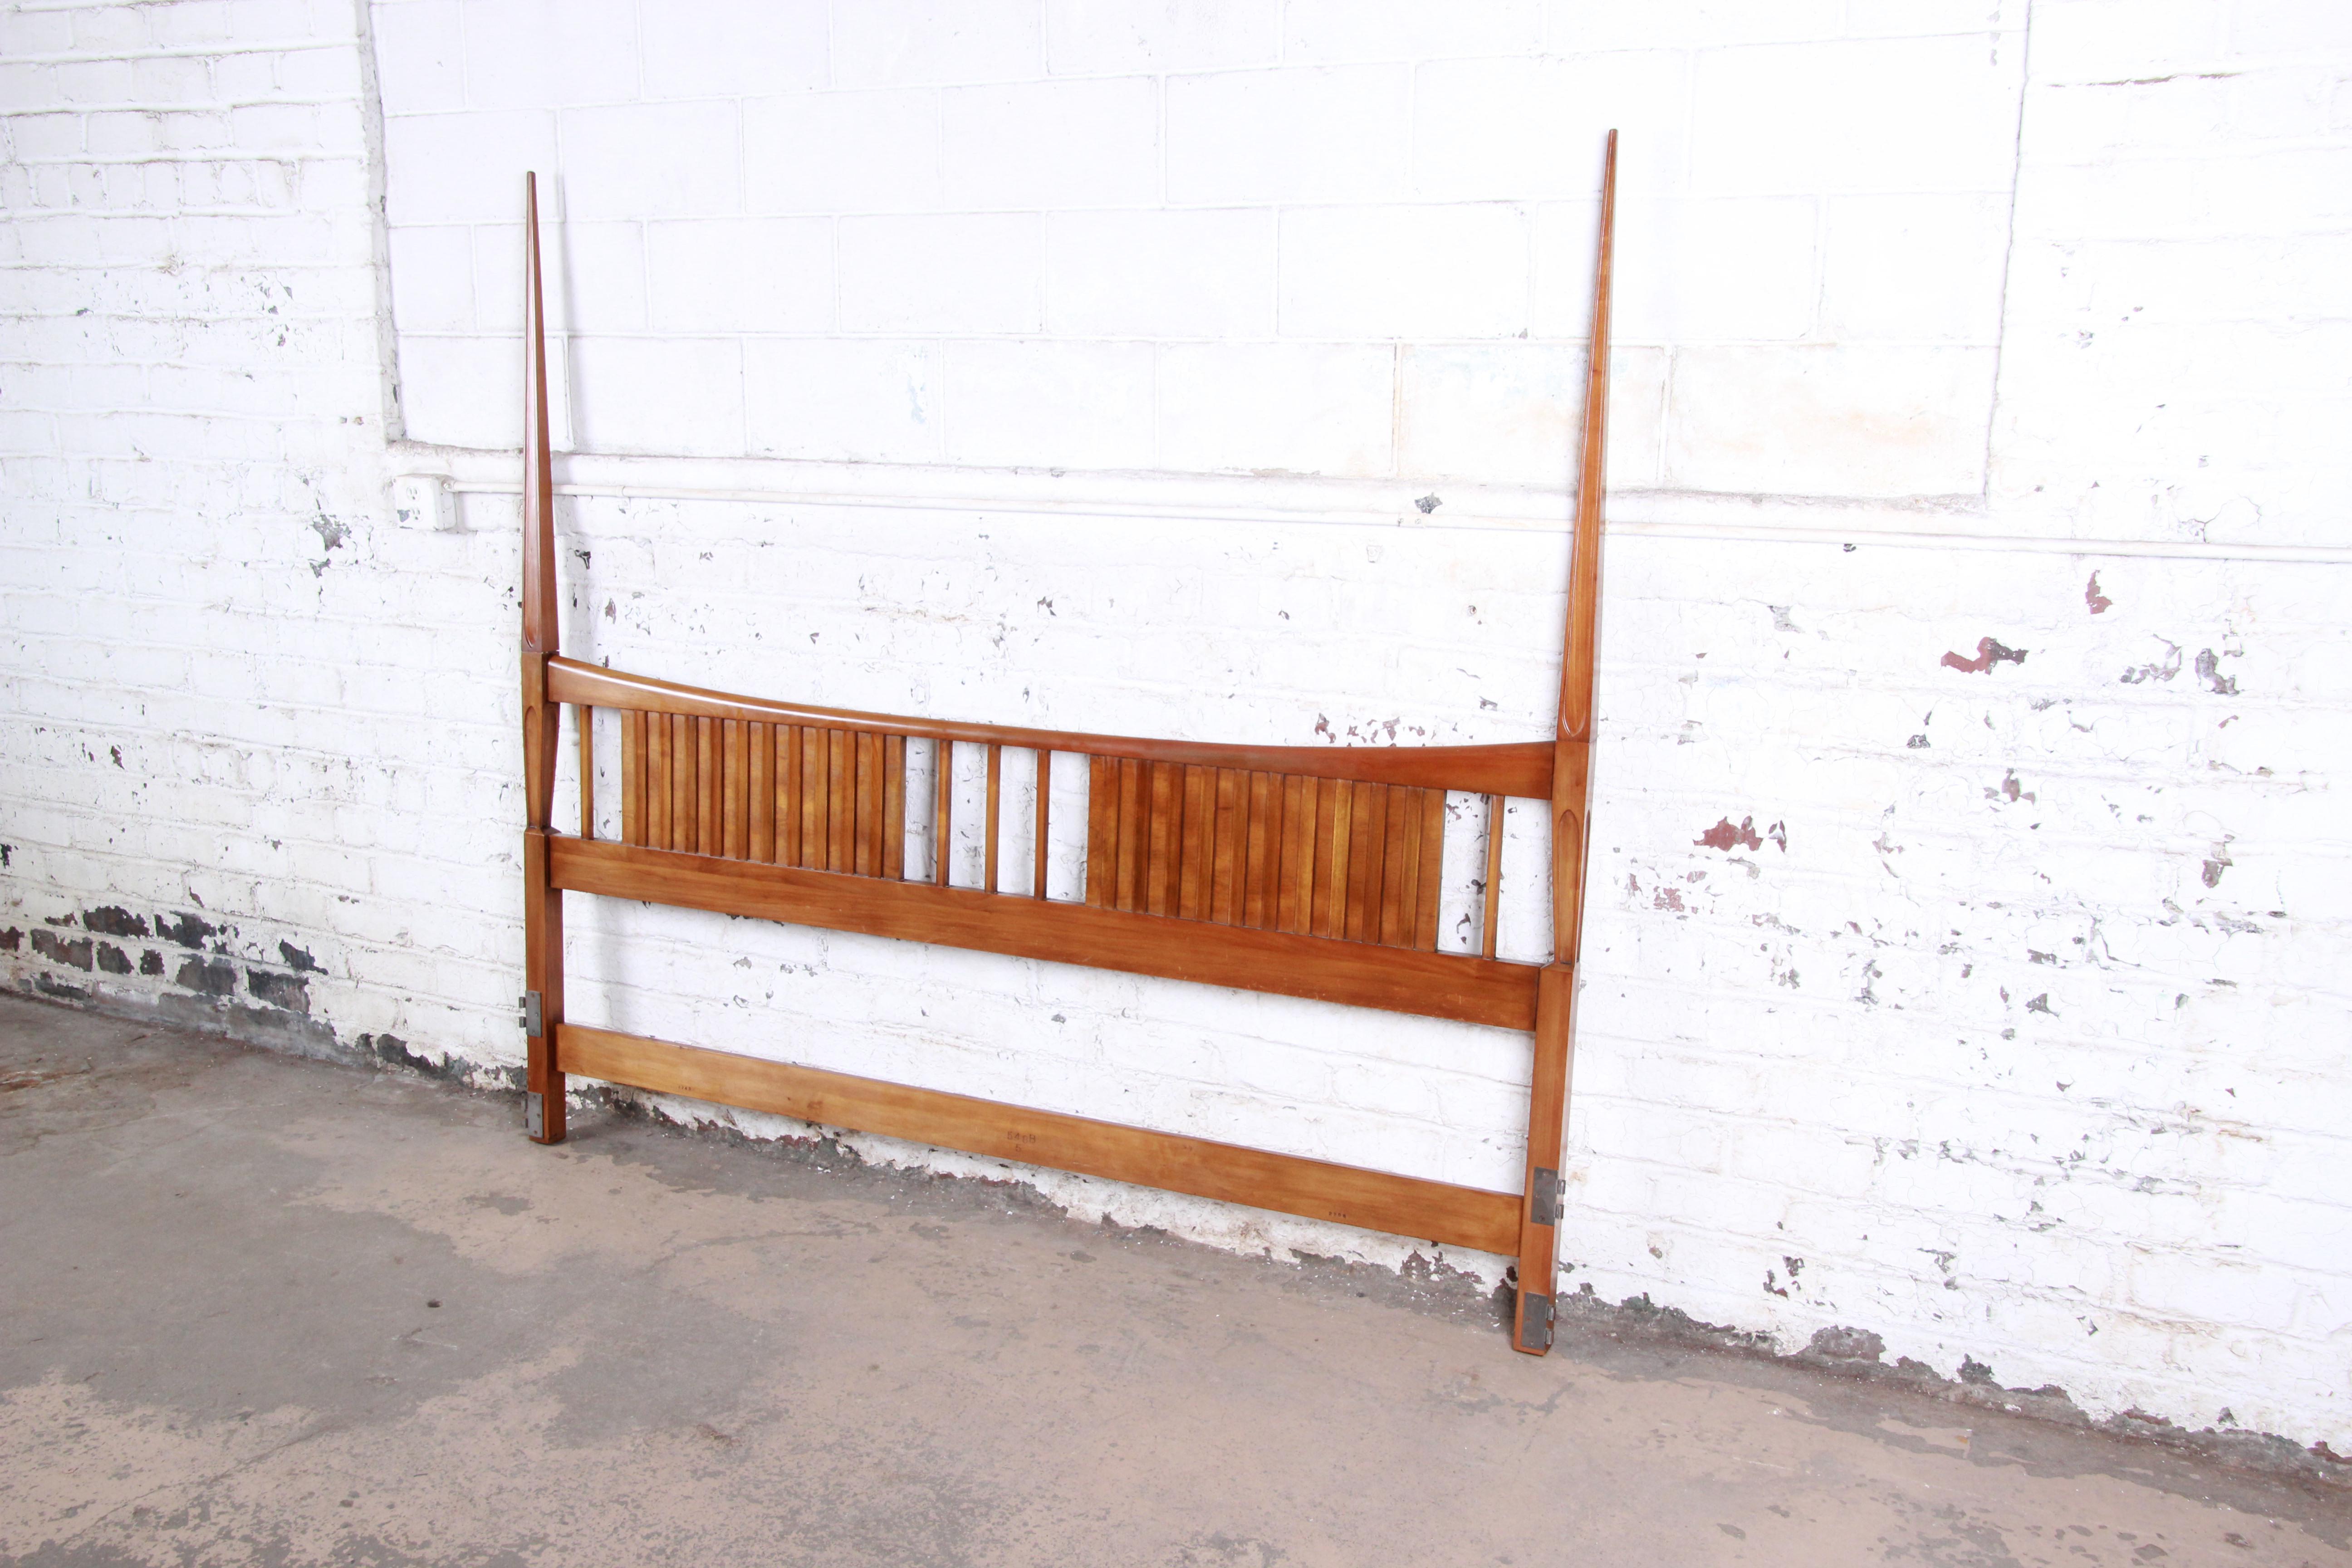 A gorgeous Mid-Century Modern sculpted cherrywood king size headboard by John Widdicomb. The headboard features gorgeous wood grain and sleek mid-century design, with tall tapered posts. The original label is present. The headboard is in excellent